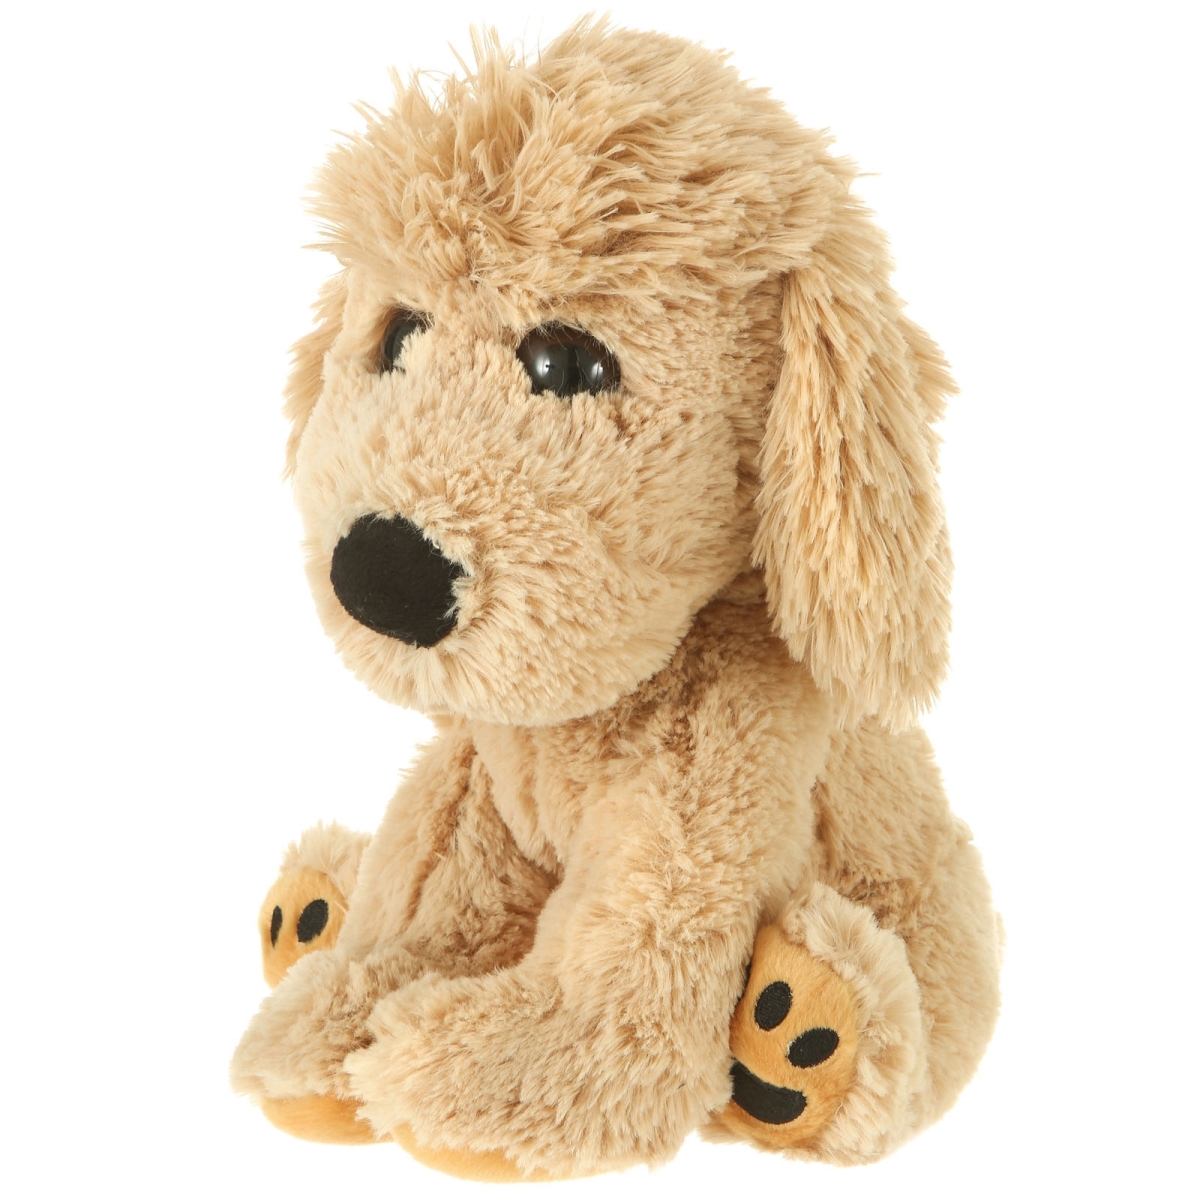 S00028 7 In. Plush Mop Top Dog